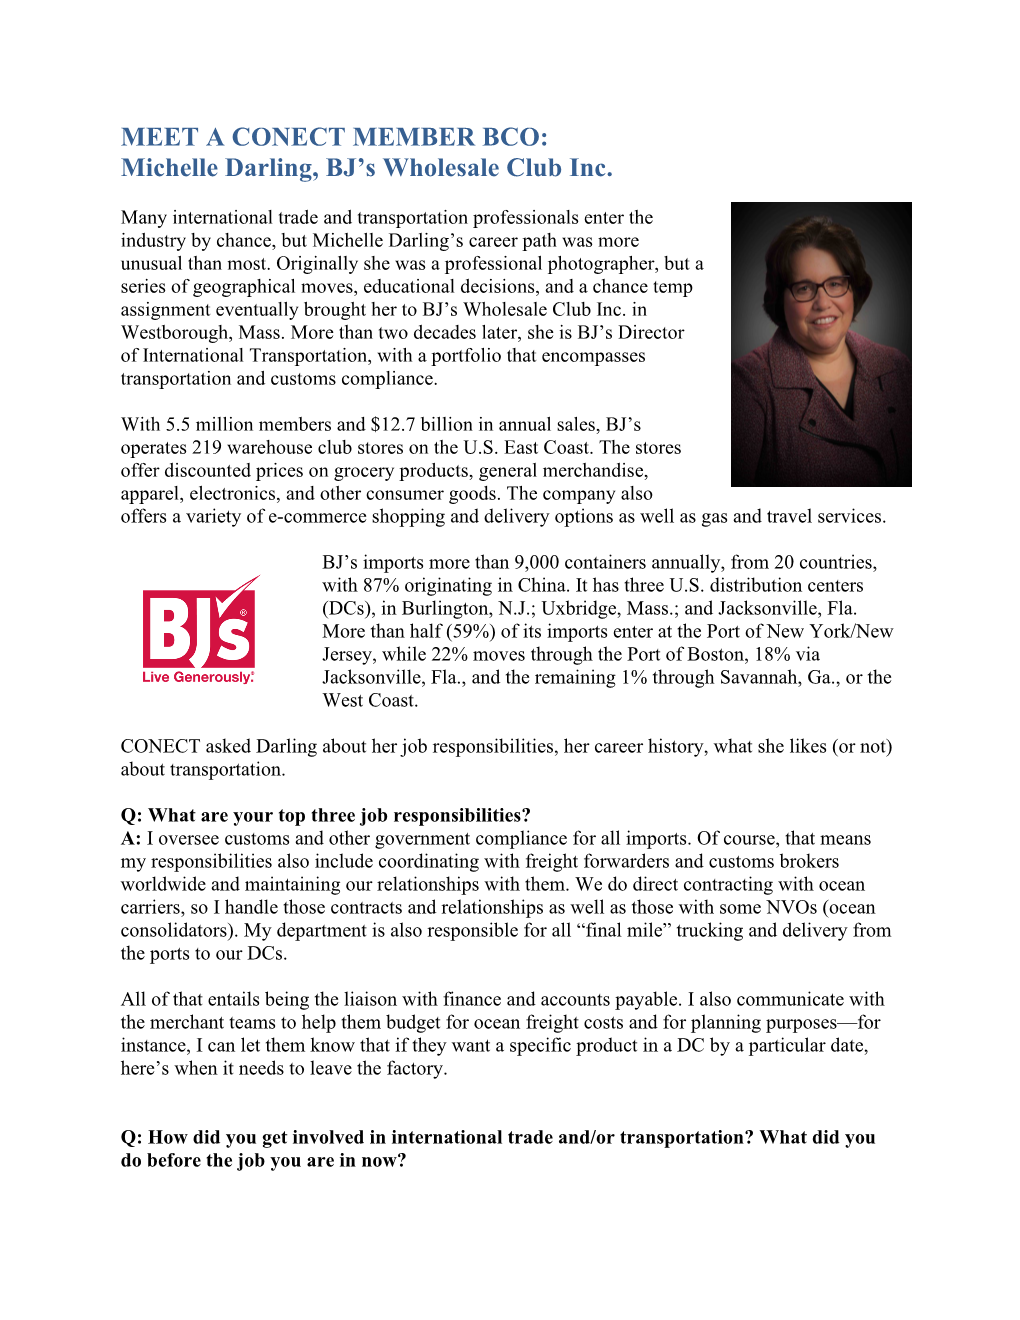 MEET a CONECT MEMBER BCO: Michelle Darling, BJ's Wholesale Club Inc